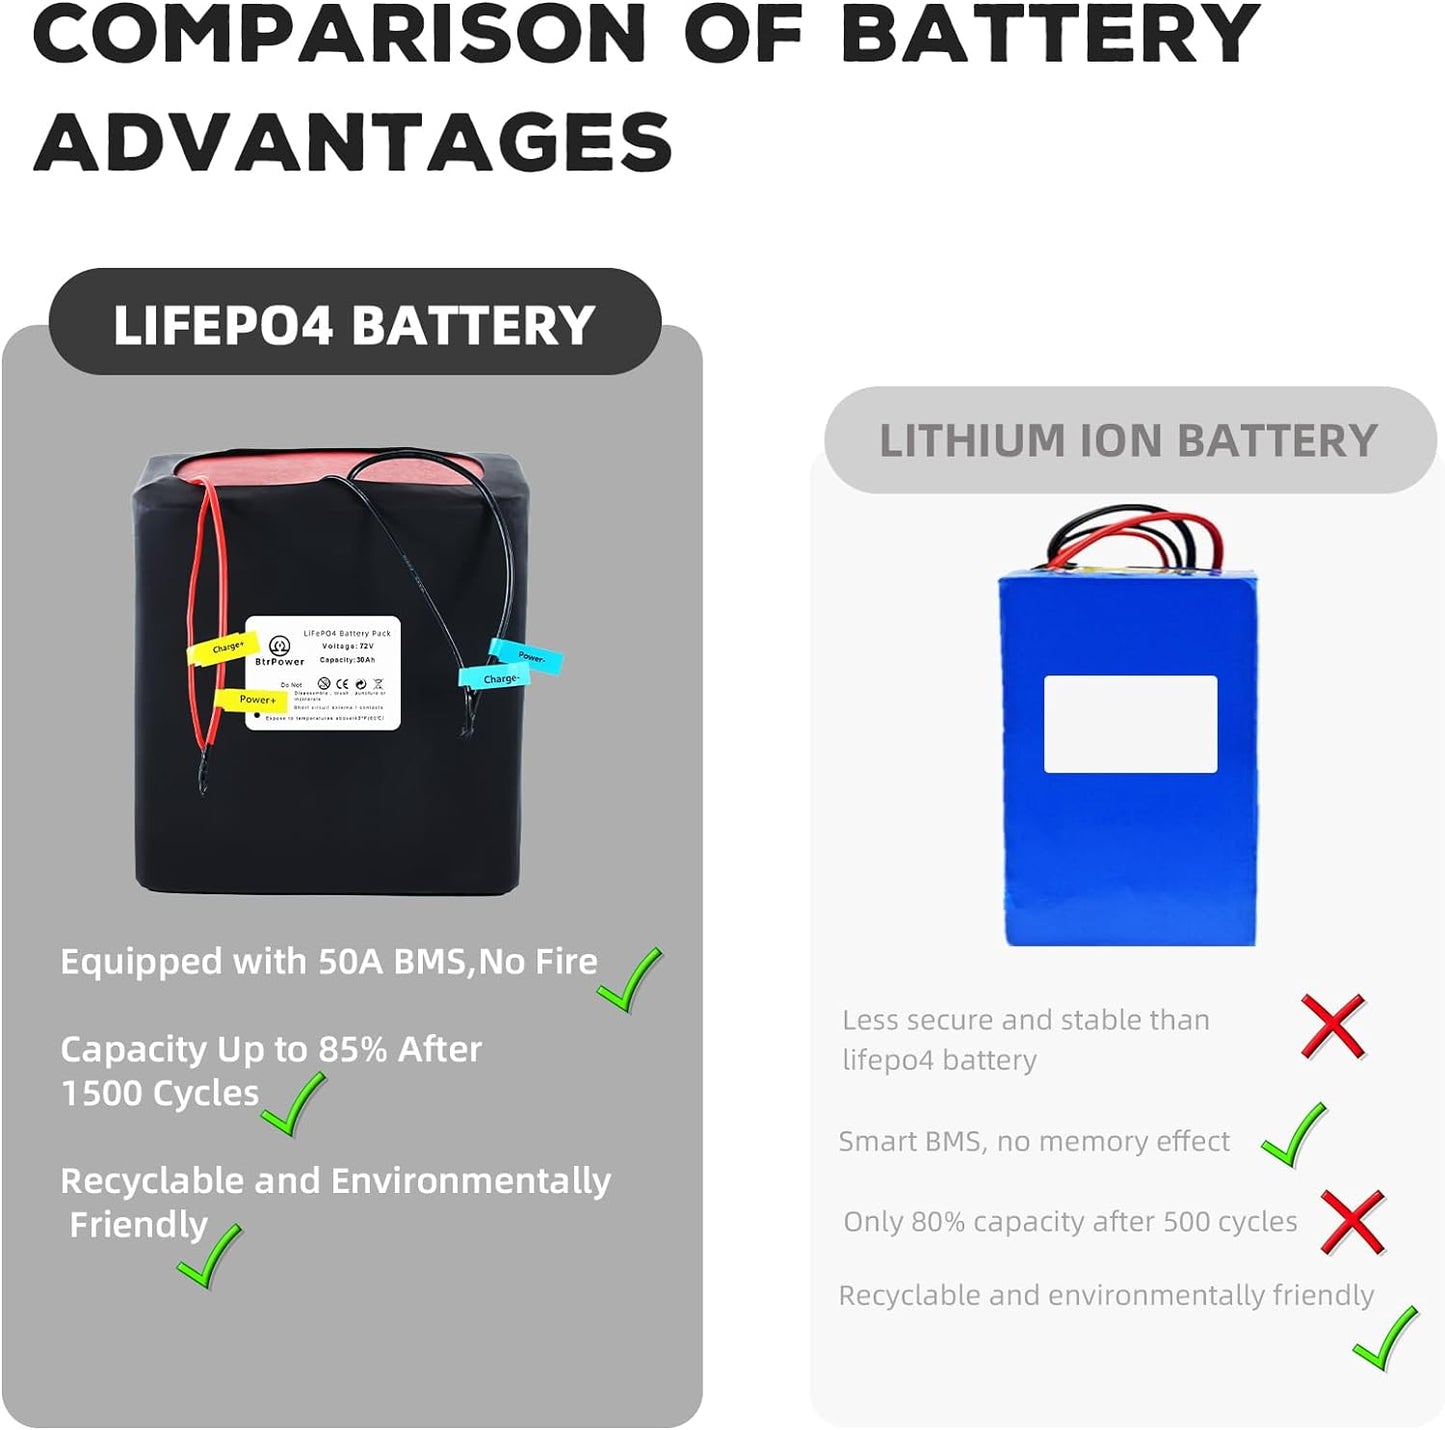 BtrPower Ebike Battery 72V 30AH LiFePO4 Battery Pack with 5A Charger 50A BMS